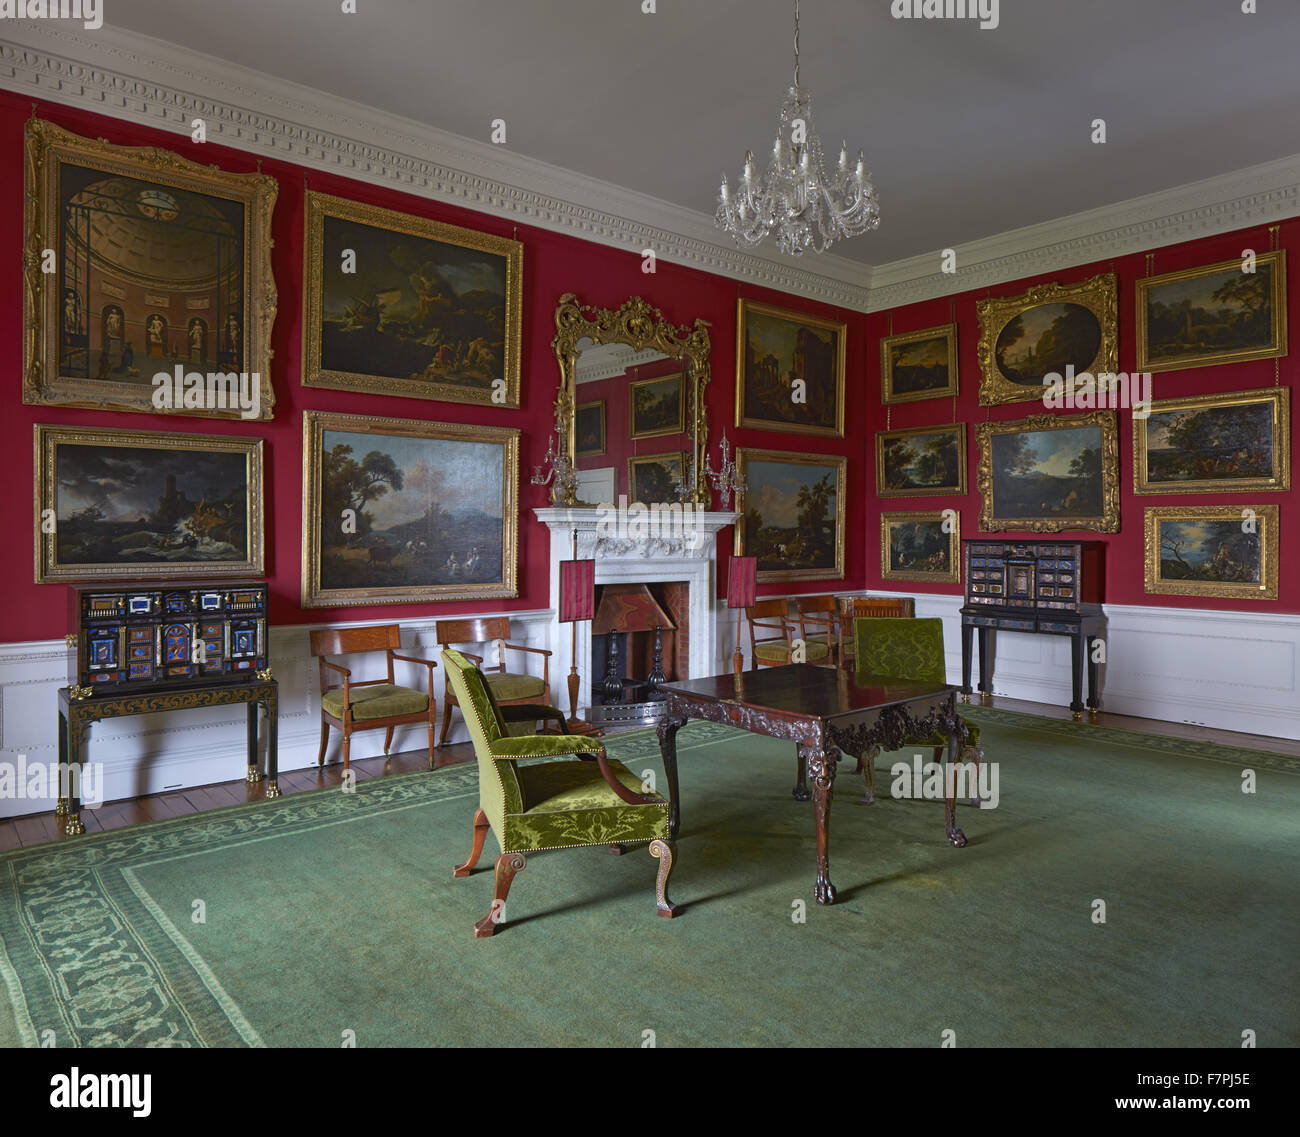 The Cabinet Room at Stourhead, Wiltshire. Stourhead House contains a unique Regency library, Chippendale furniture and inspirational paintings. Stock Photo